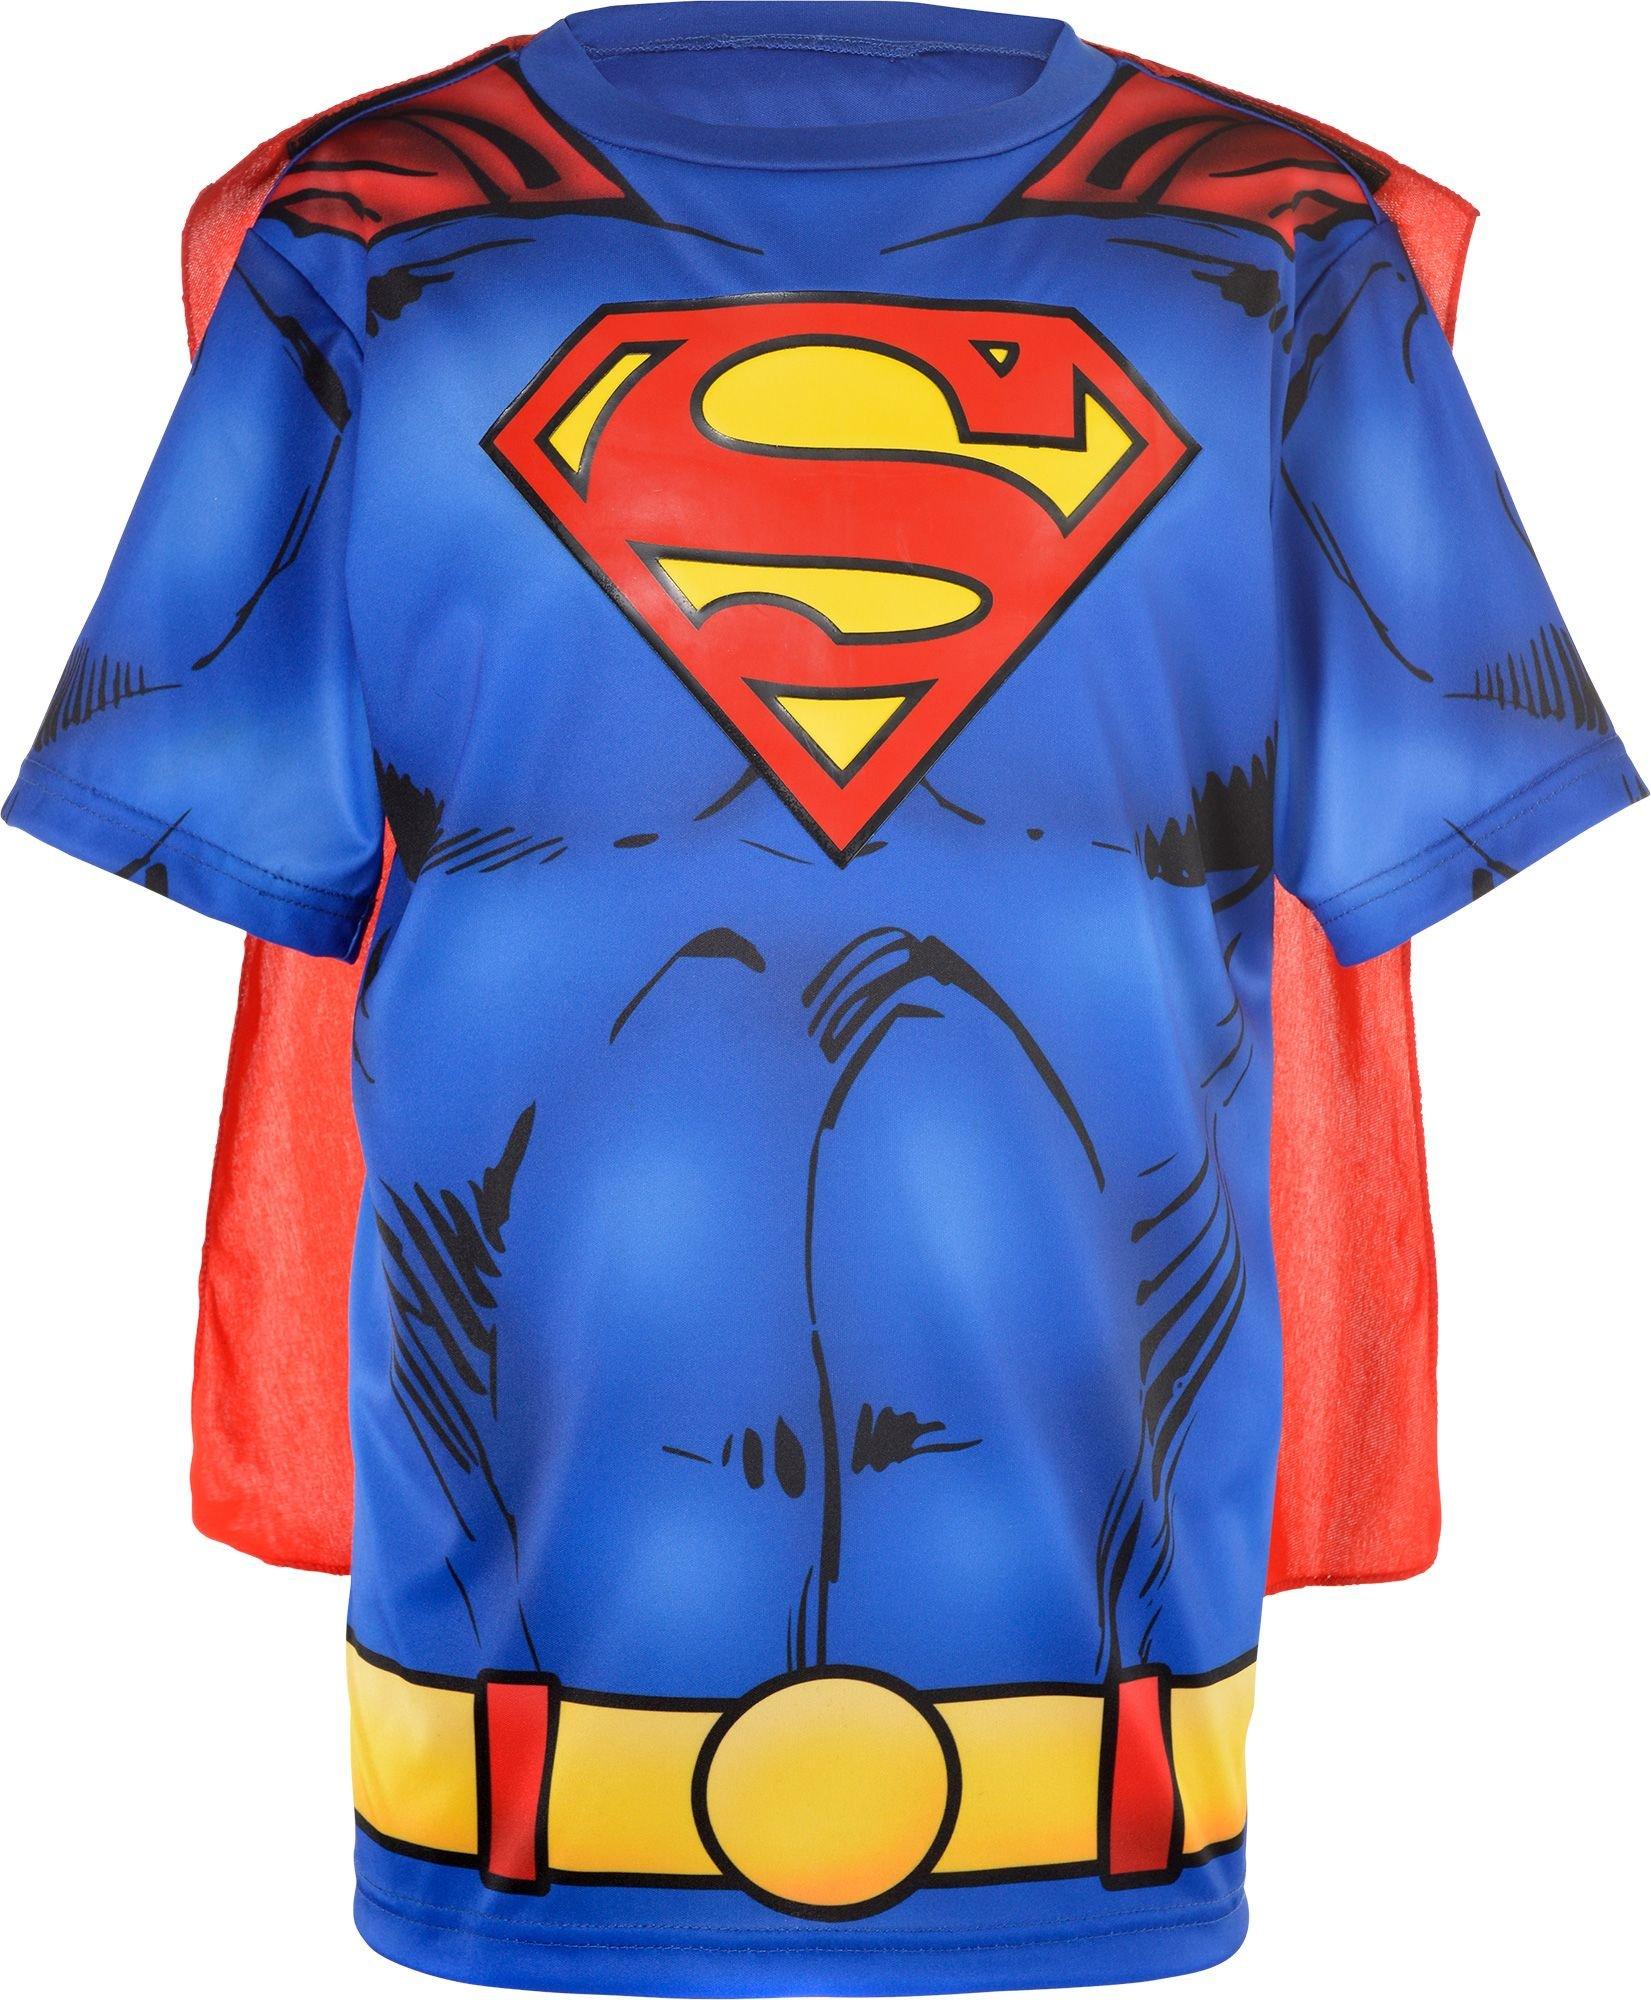 Hanna Andersson Superman Shirt With Cape